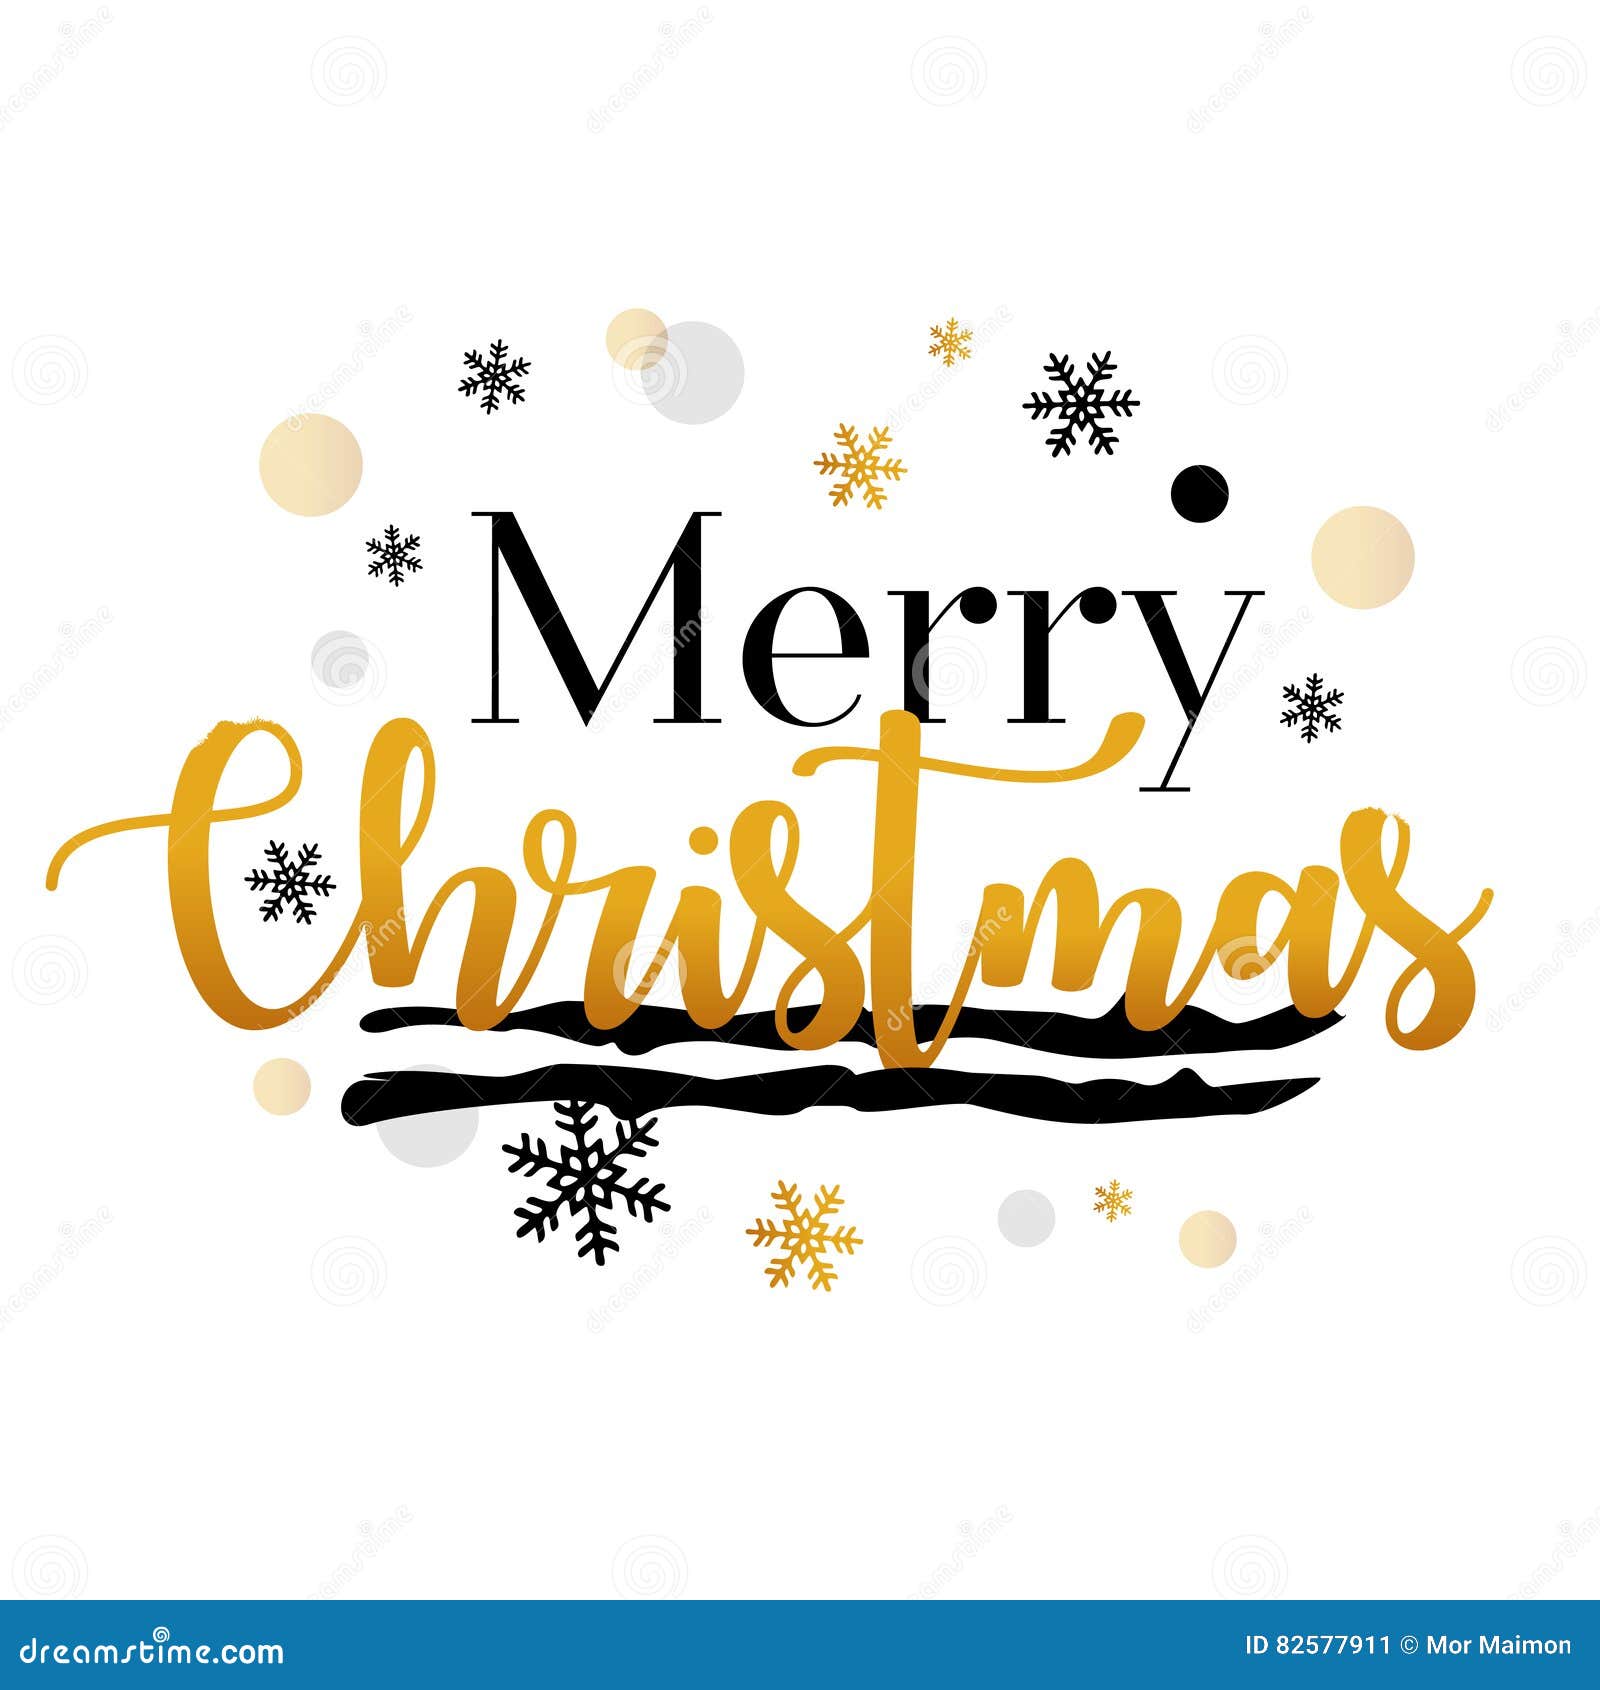 Merry Christmas Gold and Black Typographic Vector Art. Stock Vector ...